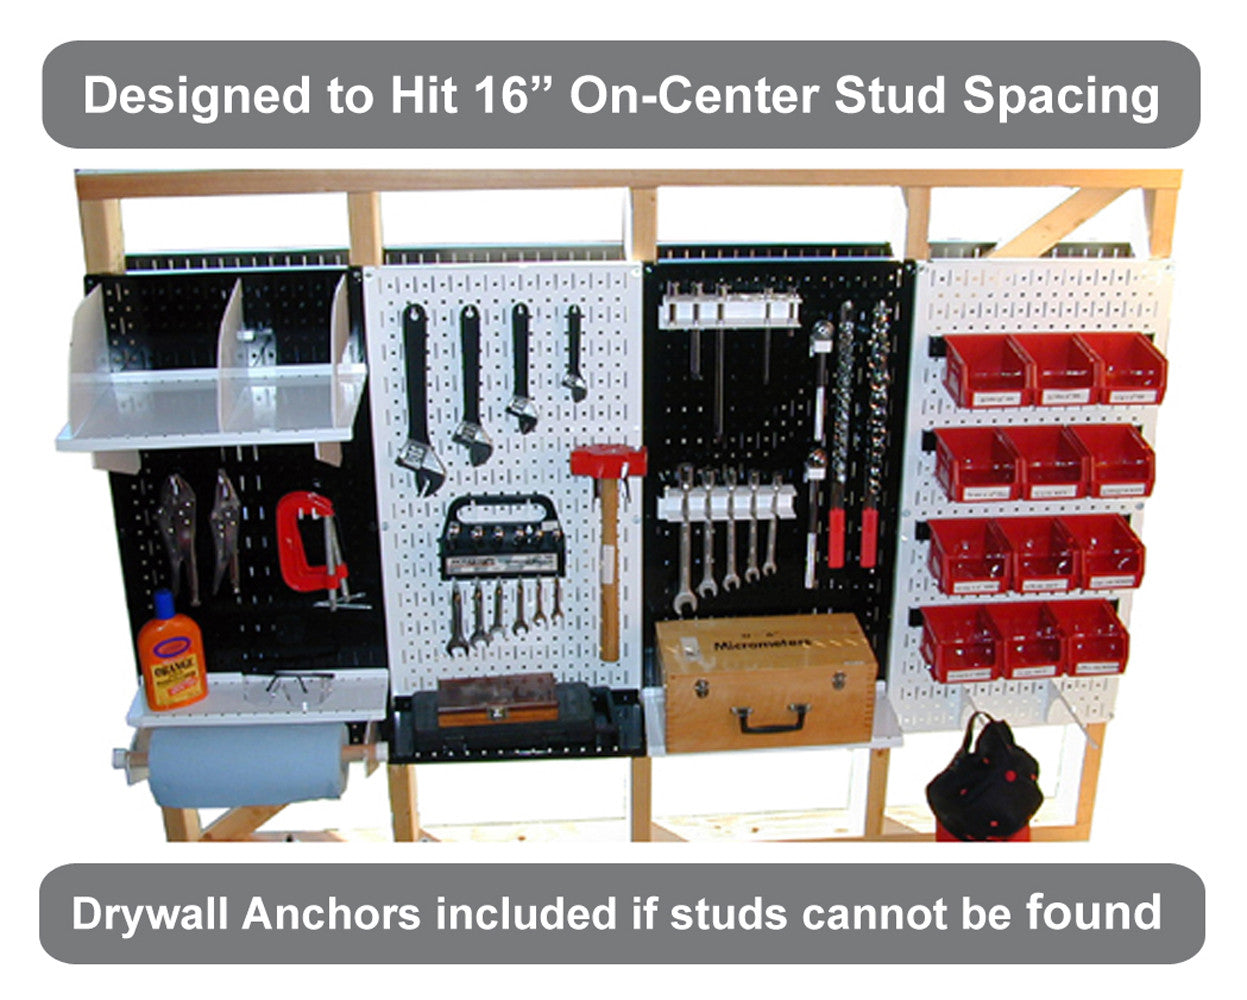 Pegboard Installs in Minutes